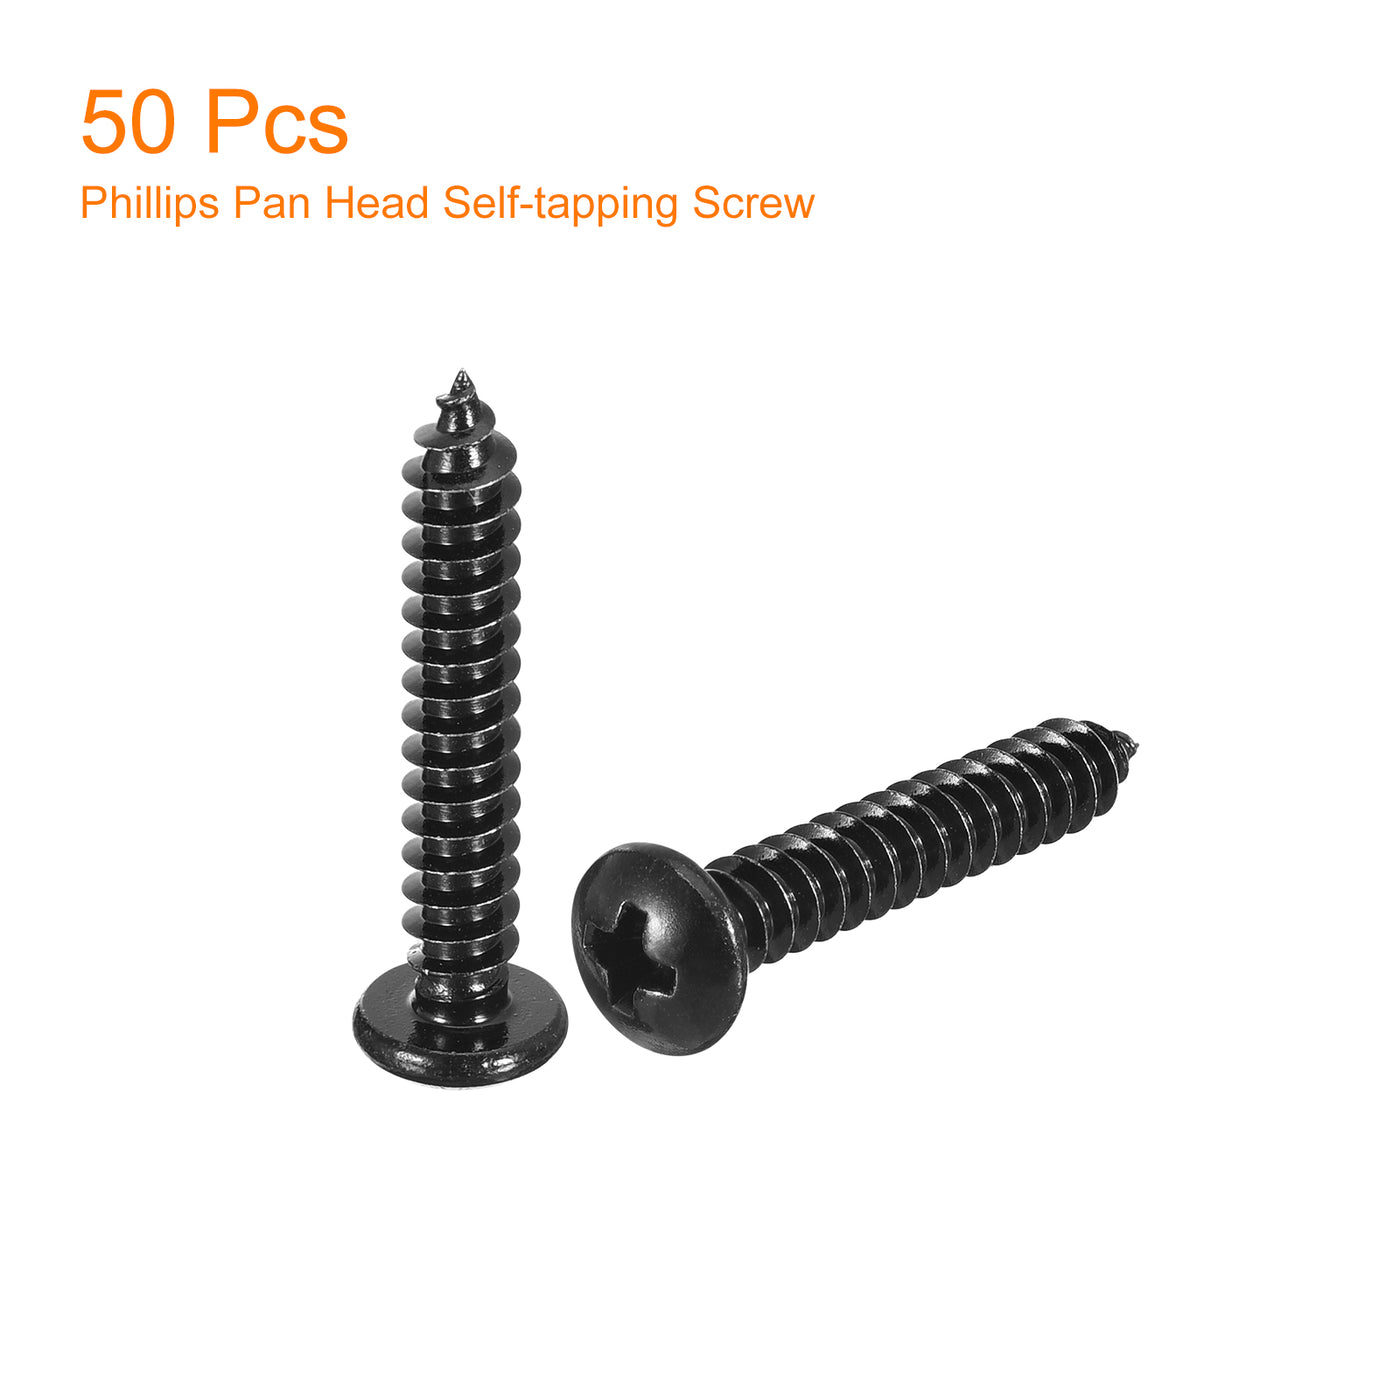 uxcell Uxcell 5mm x 30mm Phillips Pan Head Self-tapping Screw, 50pcs - 304 Stainless Steel Round Head Wood Screw Full Thread (Black)